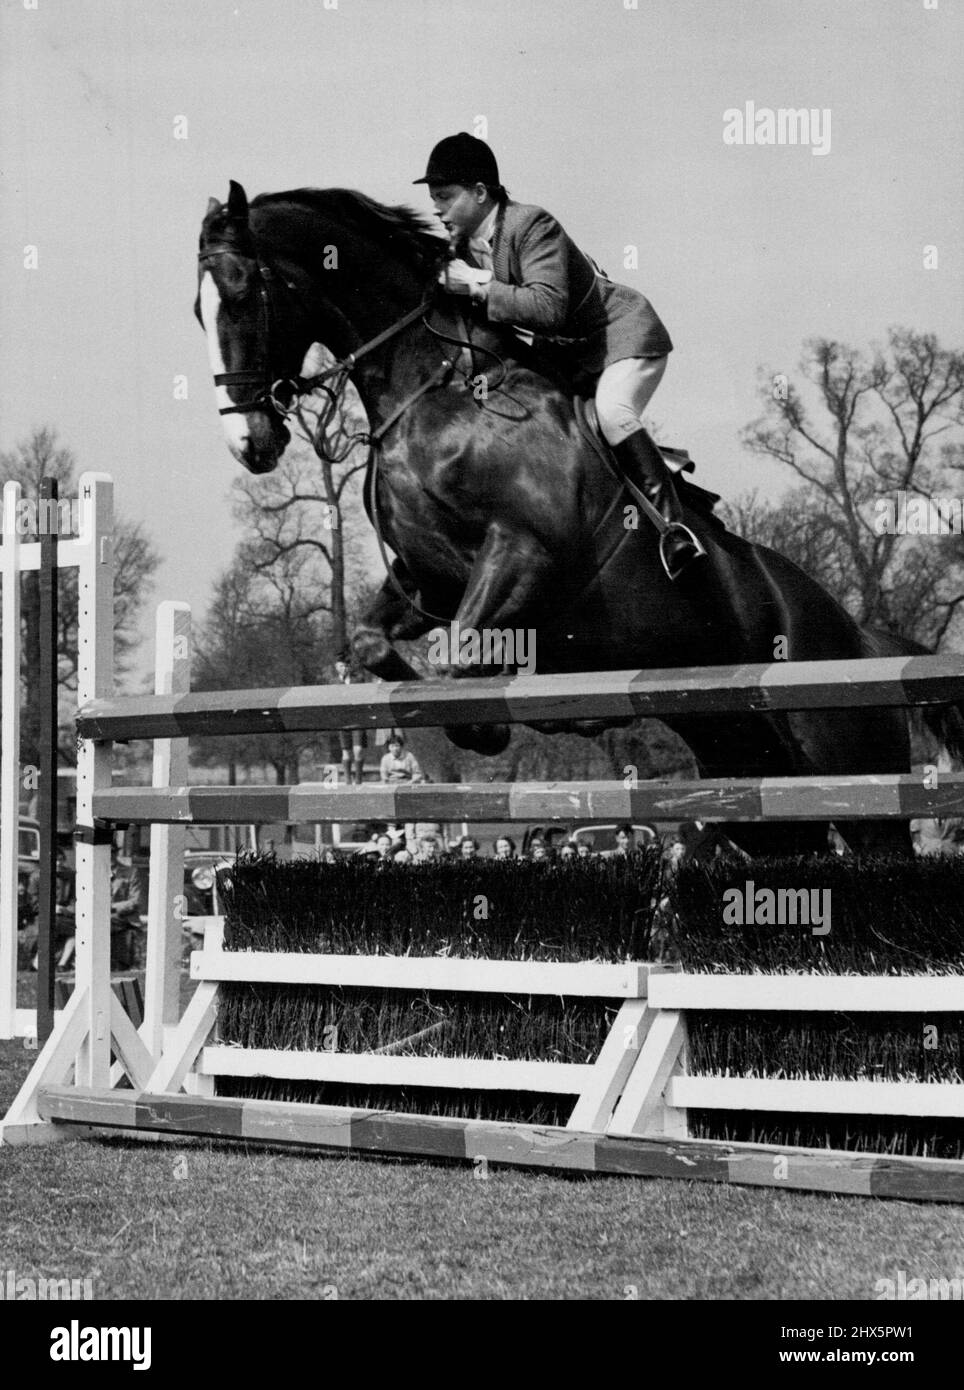 Cornfield Clears -- Under the expert guidance of Miss Pat Smythe, novice horse Cornfield clears a jump at the Beaufort Hunt Jumping Show at Badminton yesterday. The snow ends today (Saturday). April 23, 1955. (Photo by Reuter Photo). Stock Photo